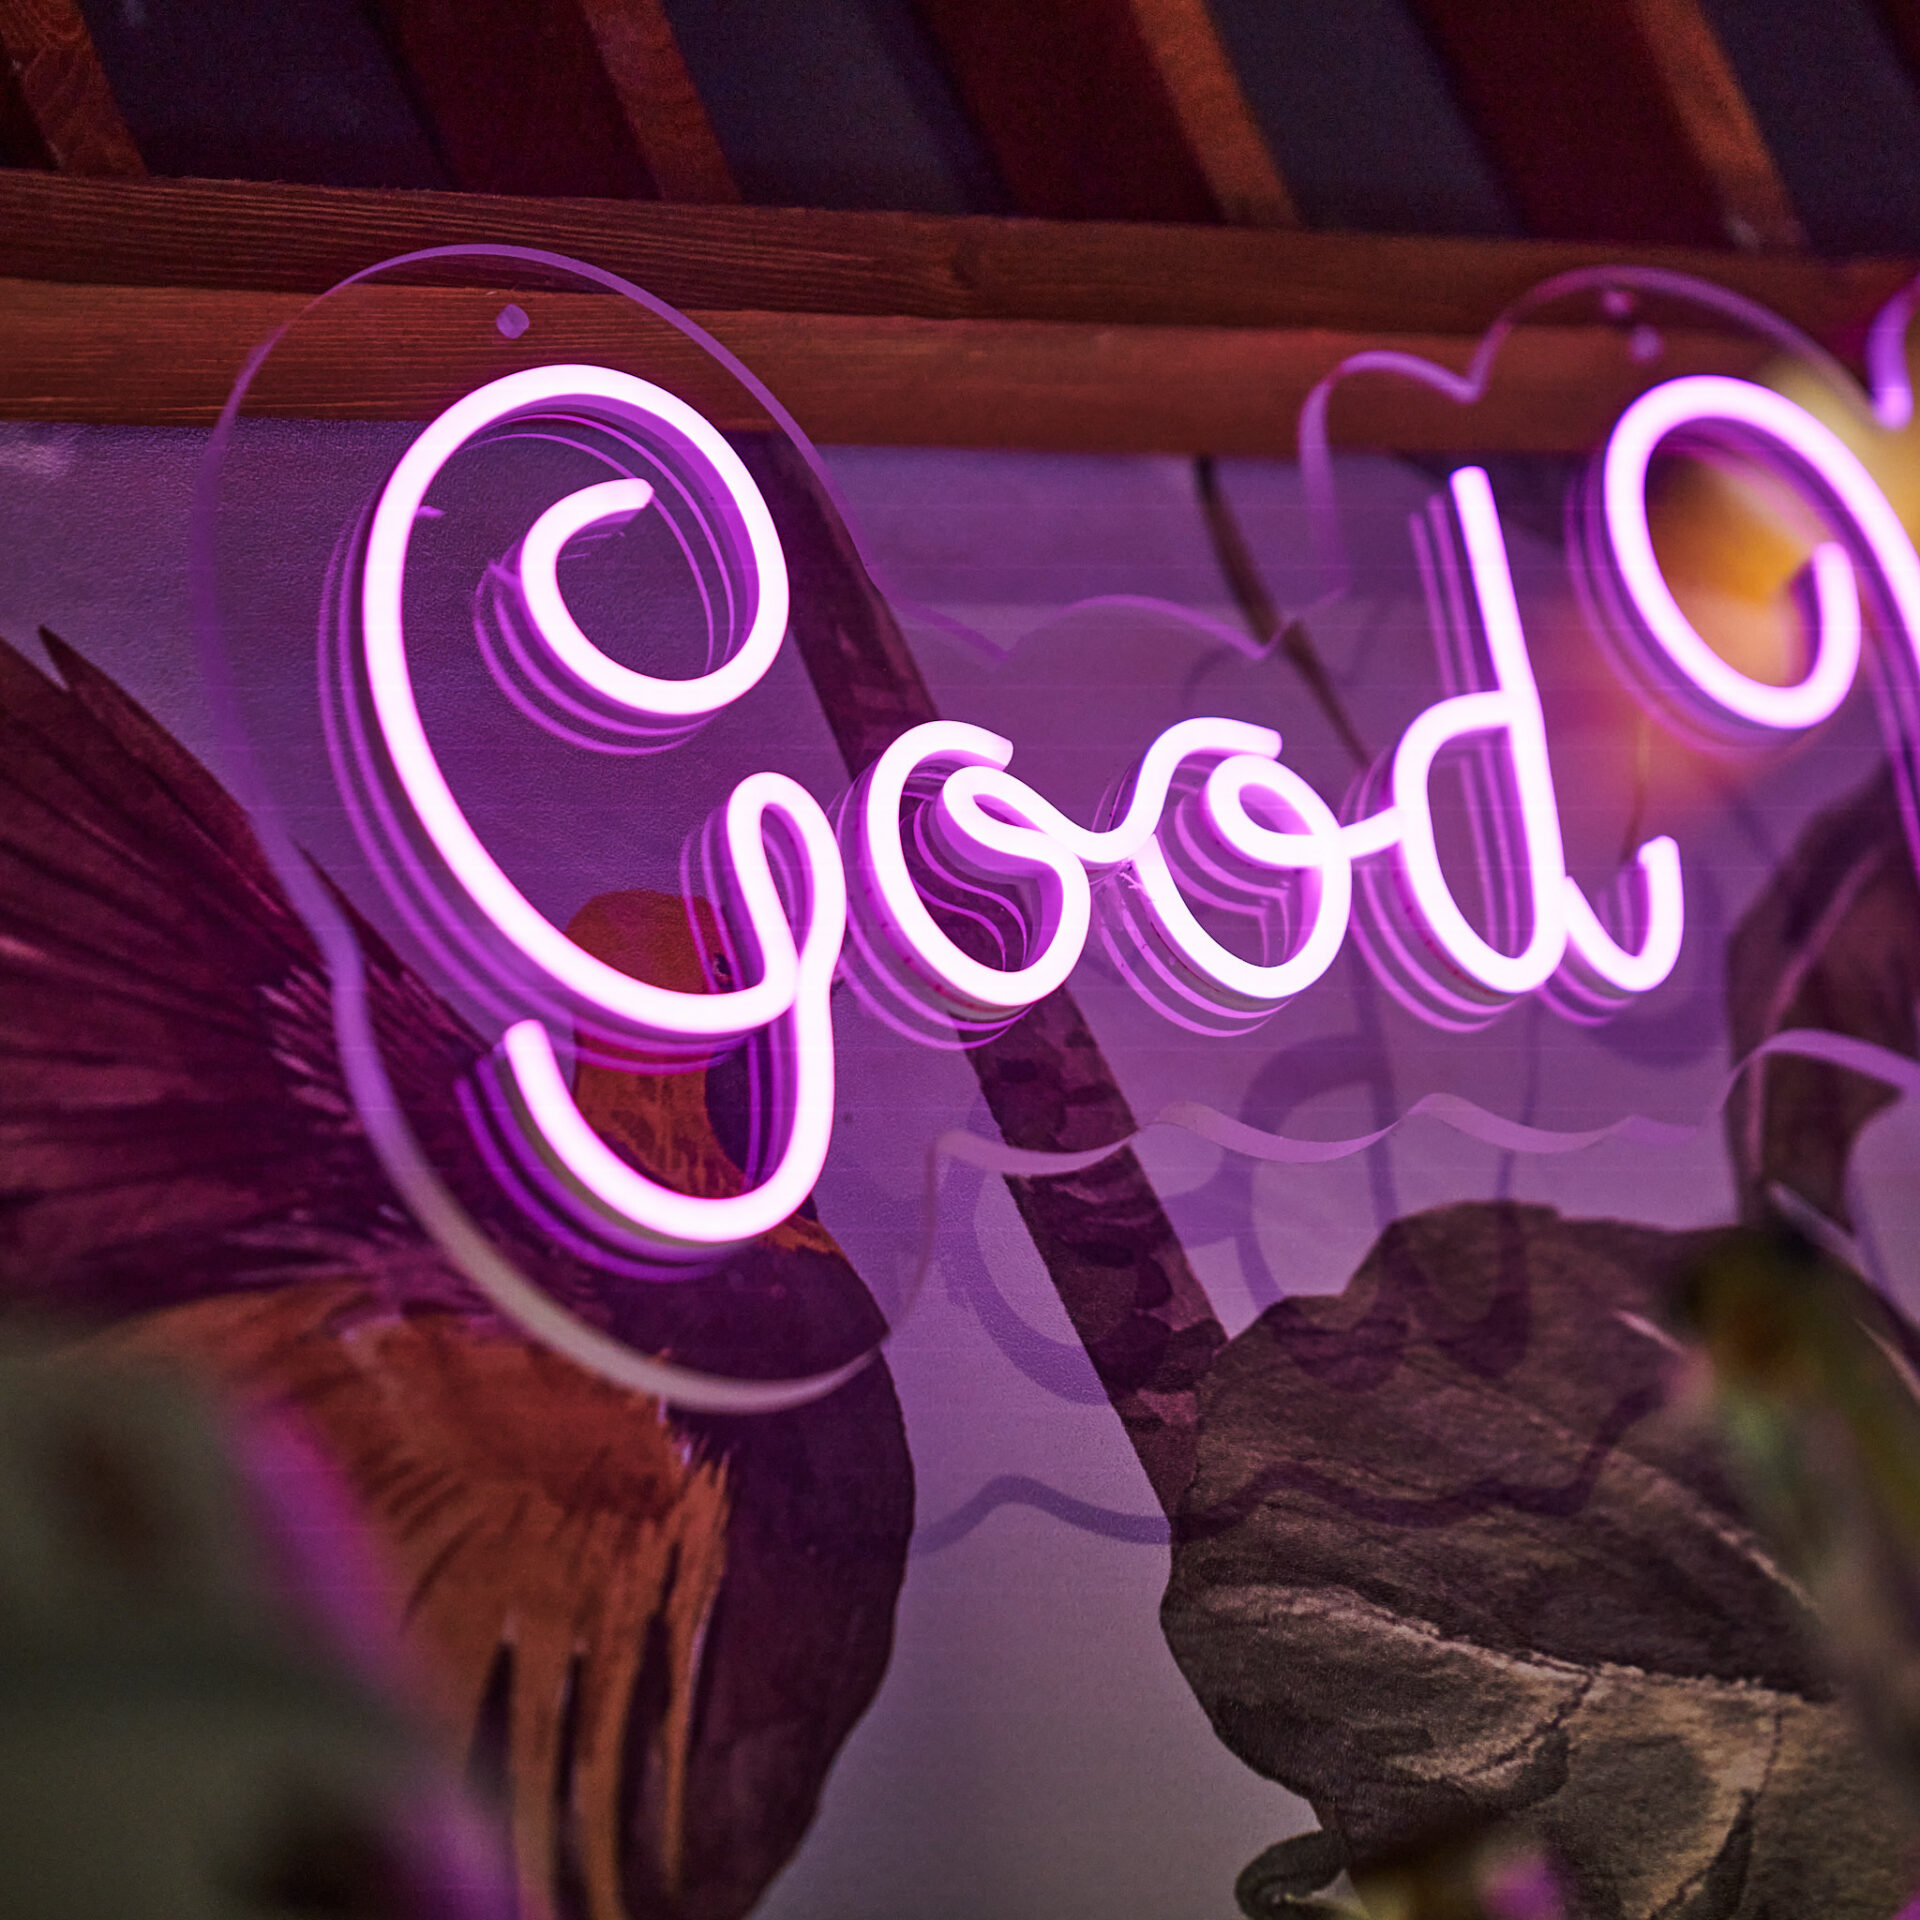 neon light good insegne personalizzate a led